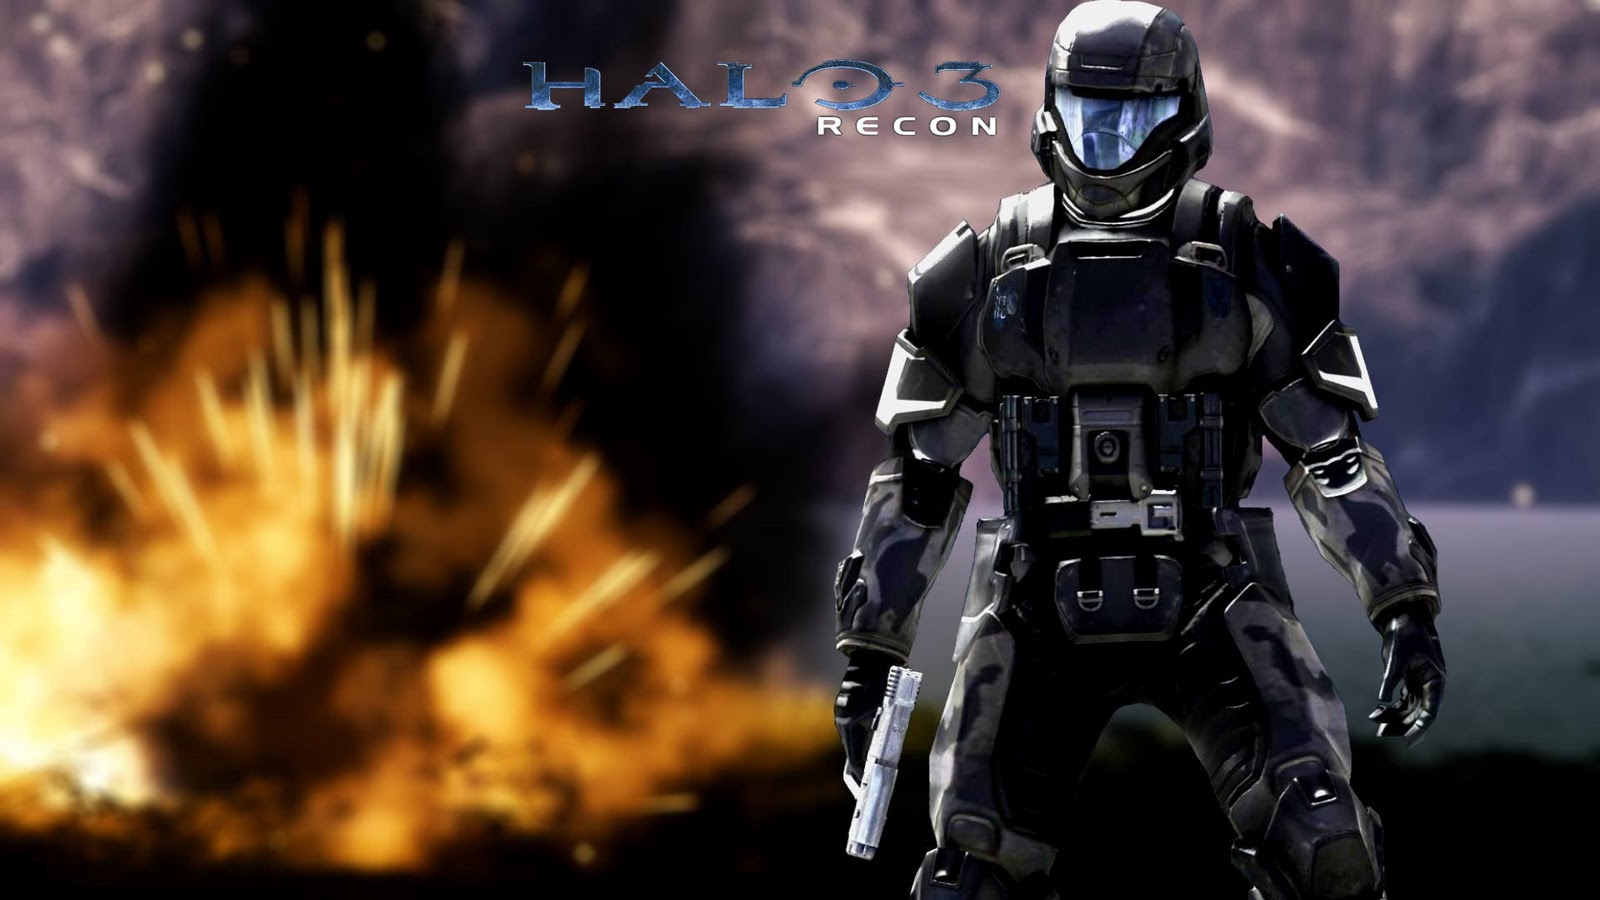 halo wallpapers hd,action adventure game,action figure,fictional character,shooter game,movie